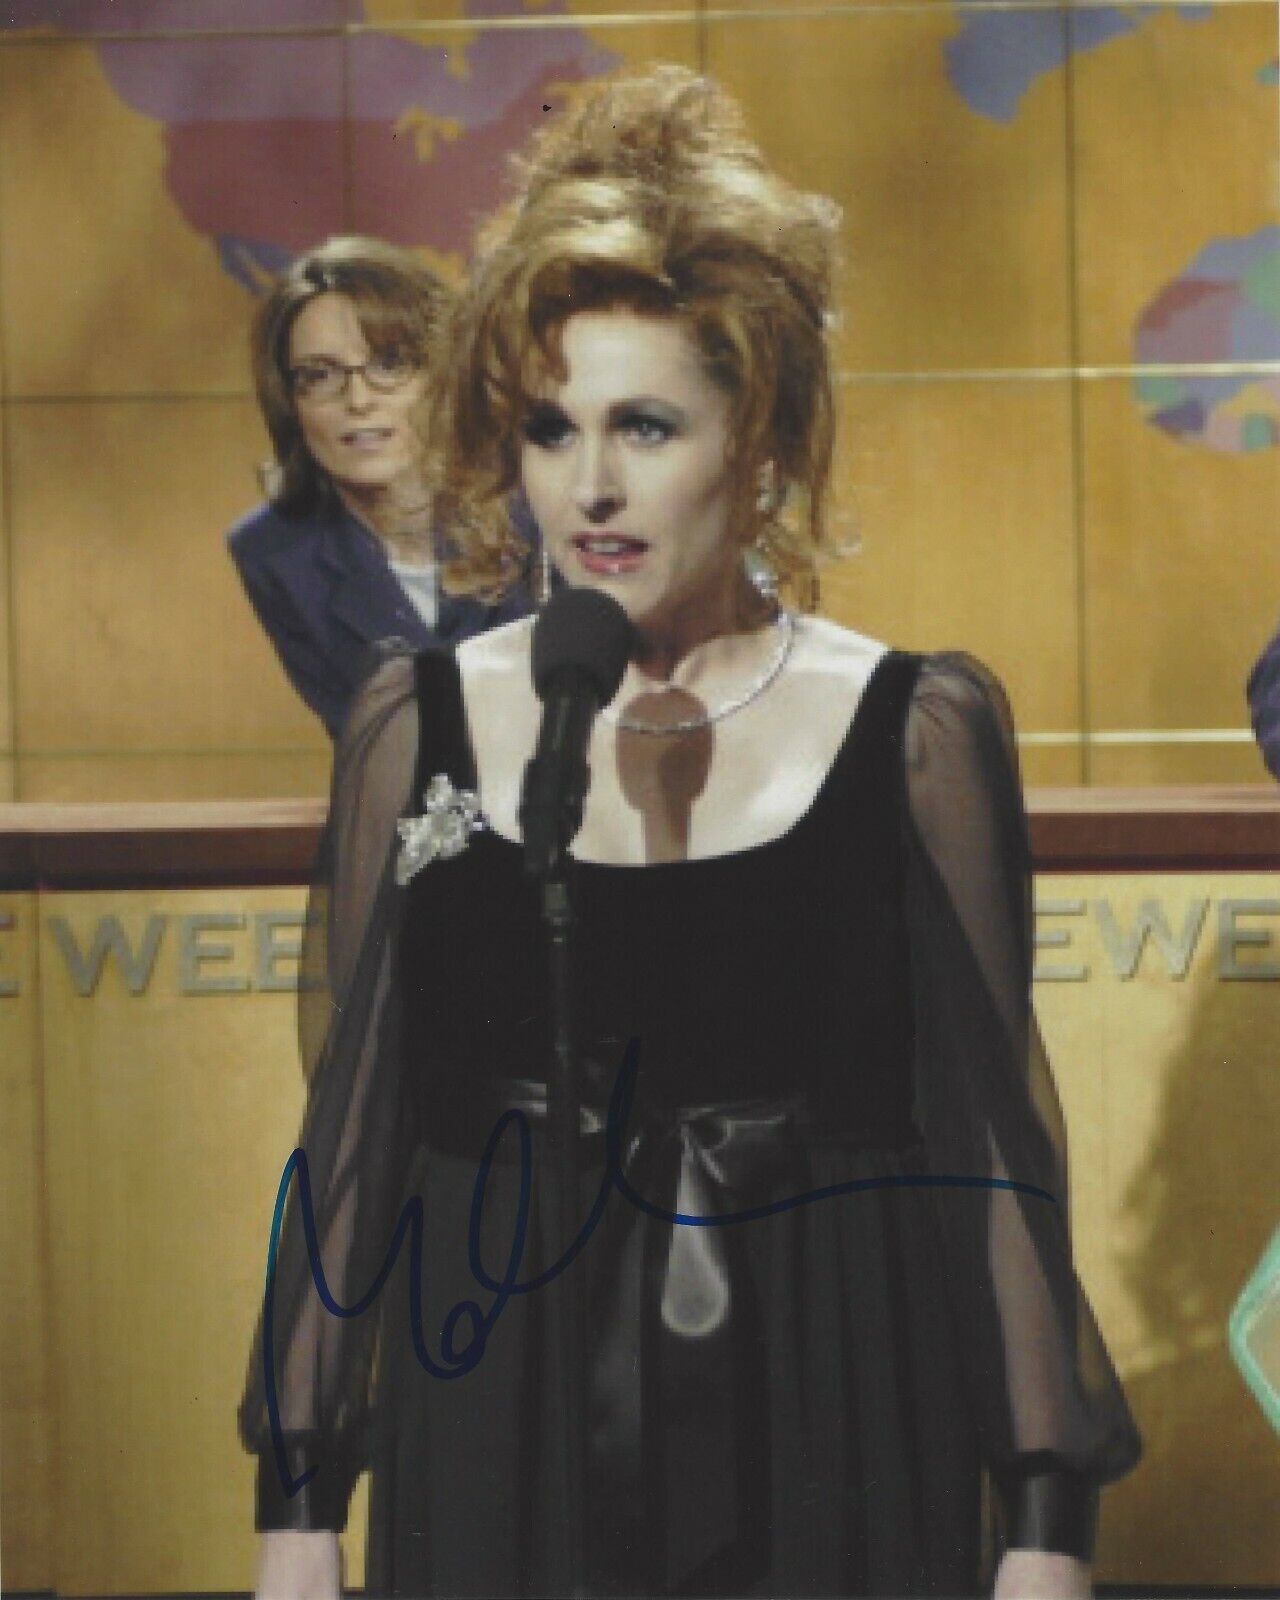 ACTRESS MOLLY SHANNON SIGNED 'SNL SATURDAY NIGHT LIVE' 8X10 Photo Poster painting w/COA COMEDY